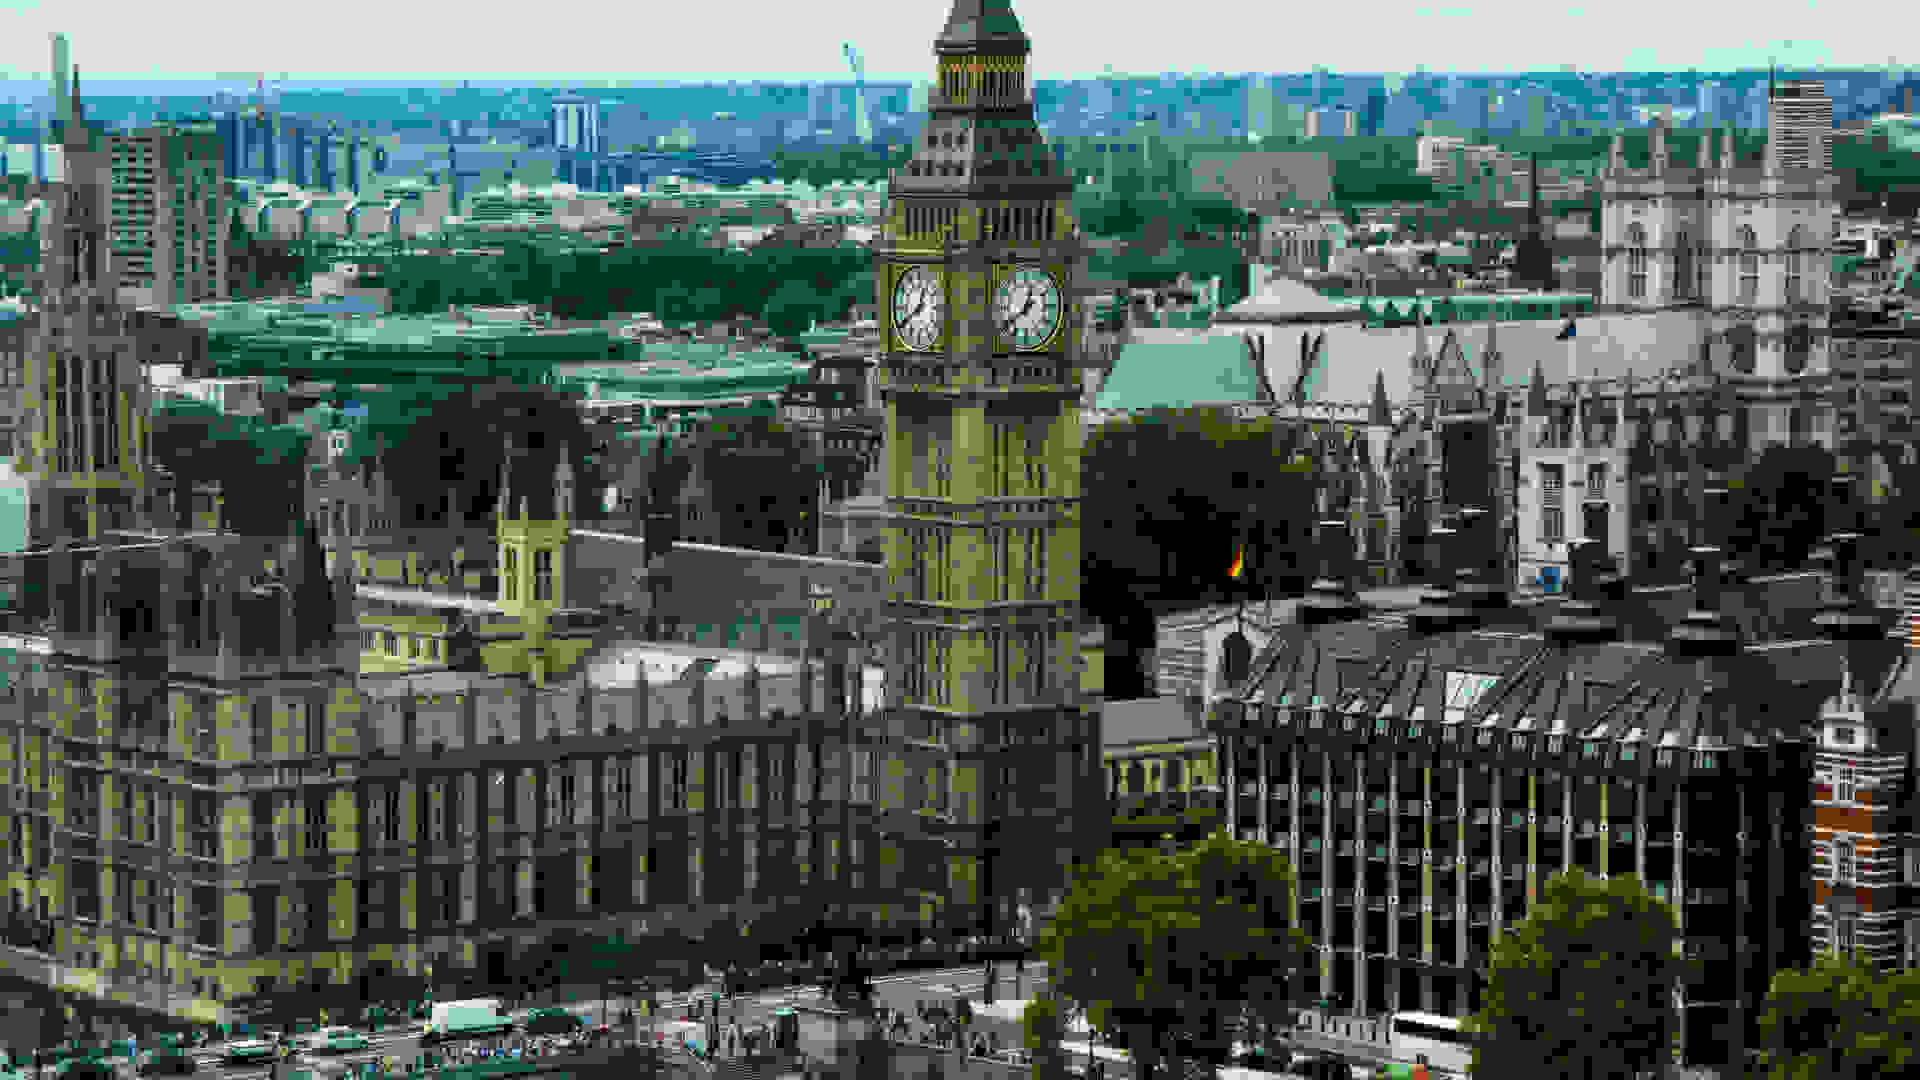 Palace of Westminster and Portcullis House (UK Houses of Parliament). © UK Parliament